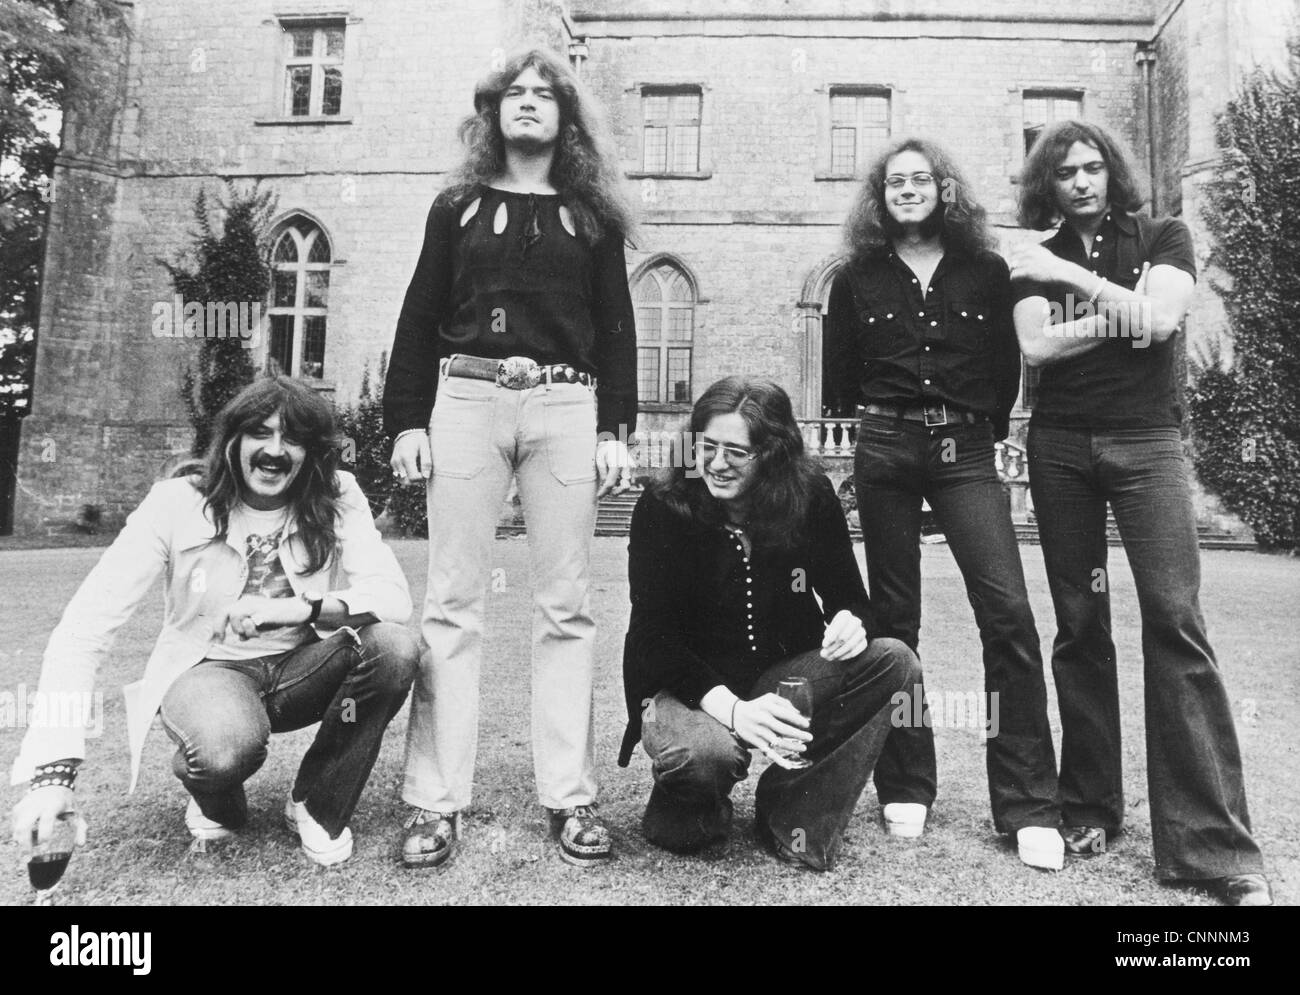 DEEP PURPLE Promotional photo of UK rock group about 1975 Stock Photo